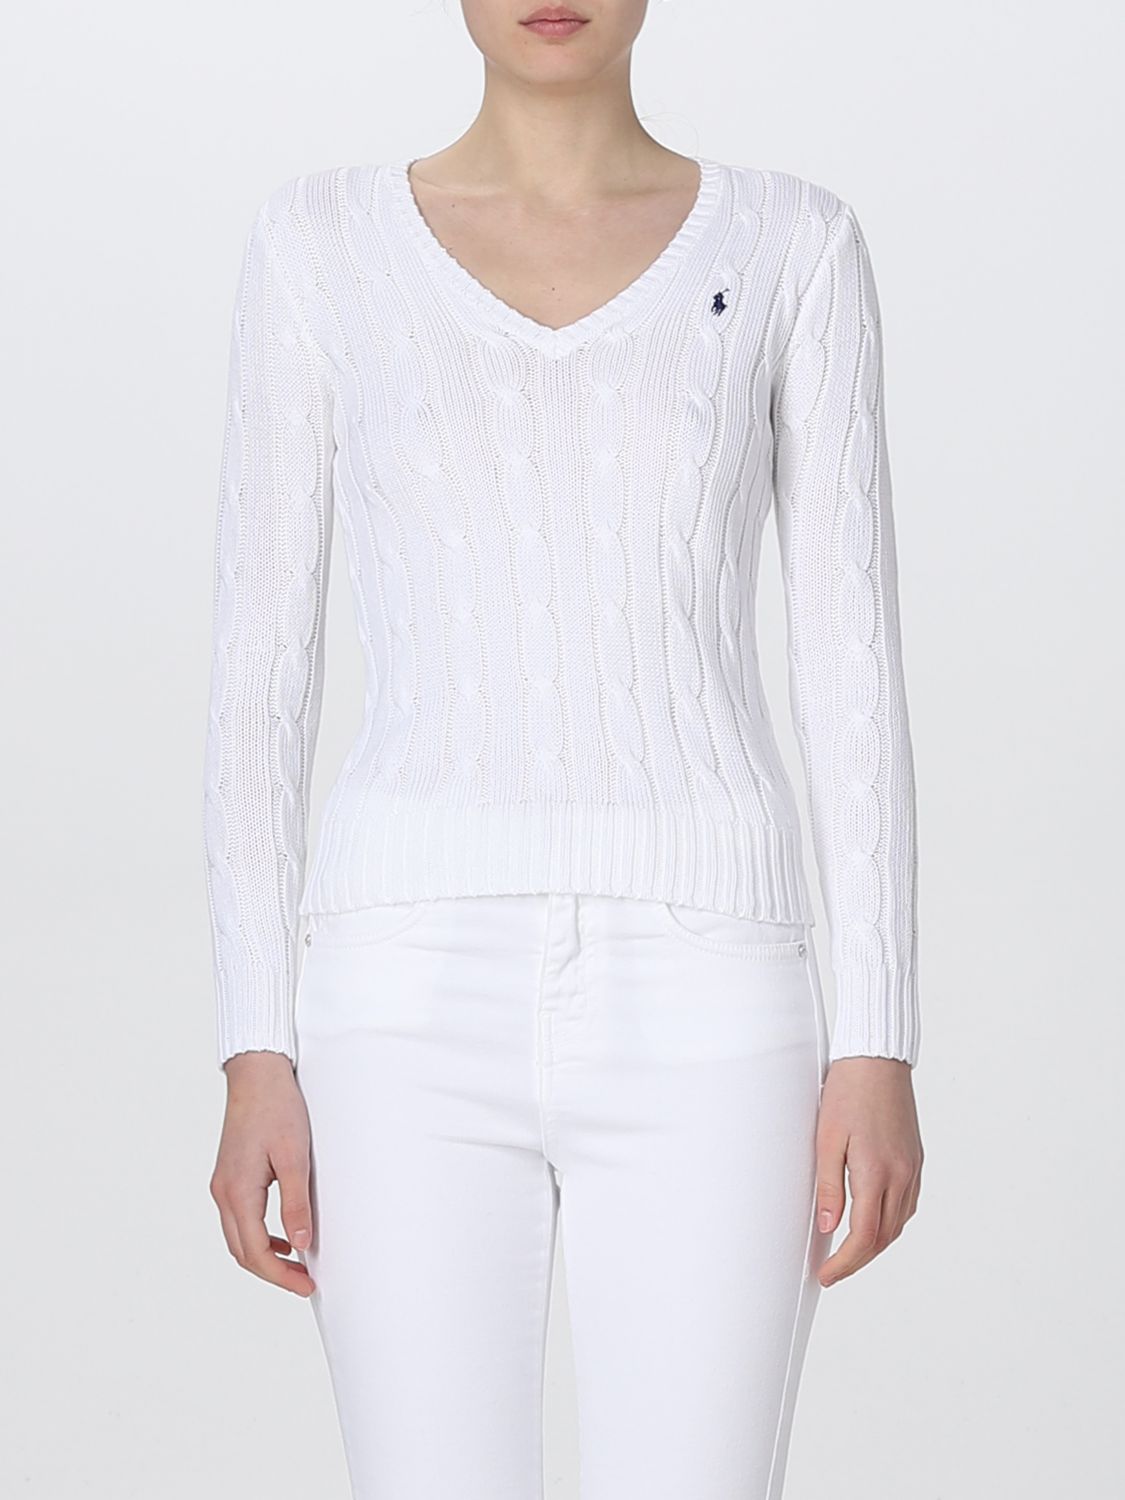 POLO RALPH LAUREN: sweater for woman - White | Polo Ralph Lauren sweater  211891641 online on 